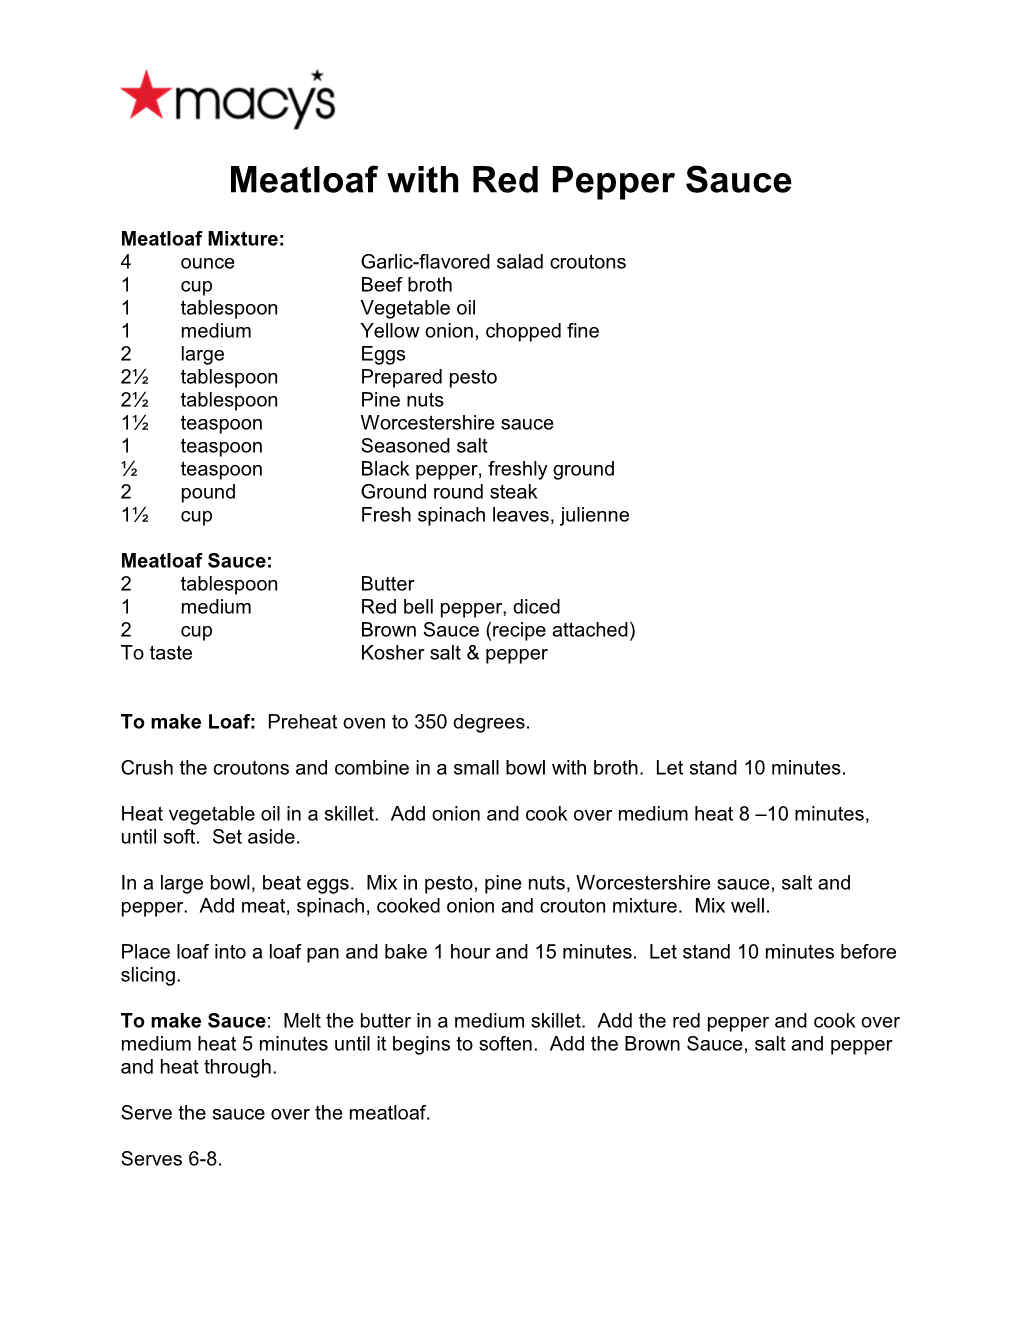 Meatloaf with Red Pepper Sauce